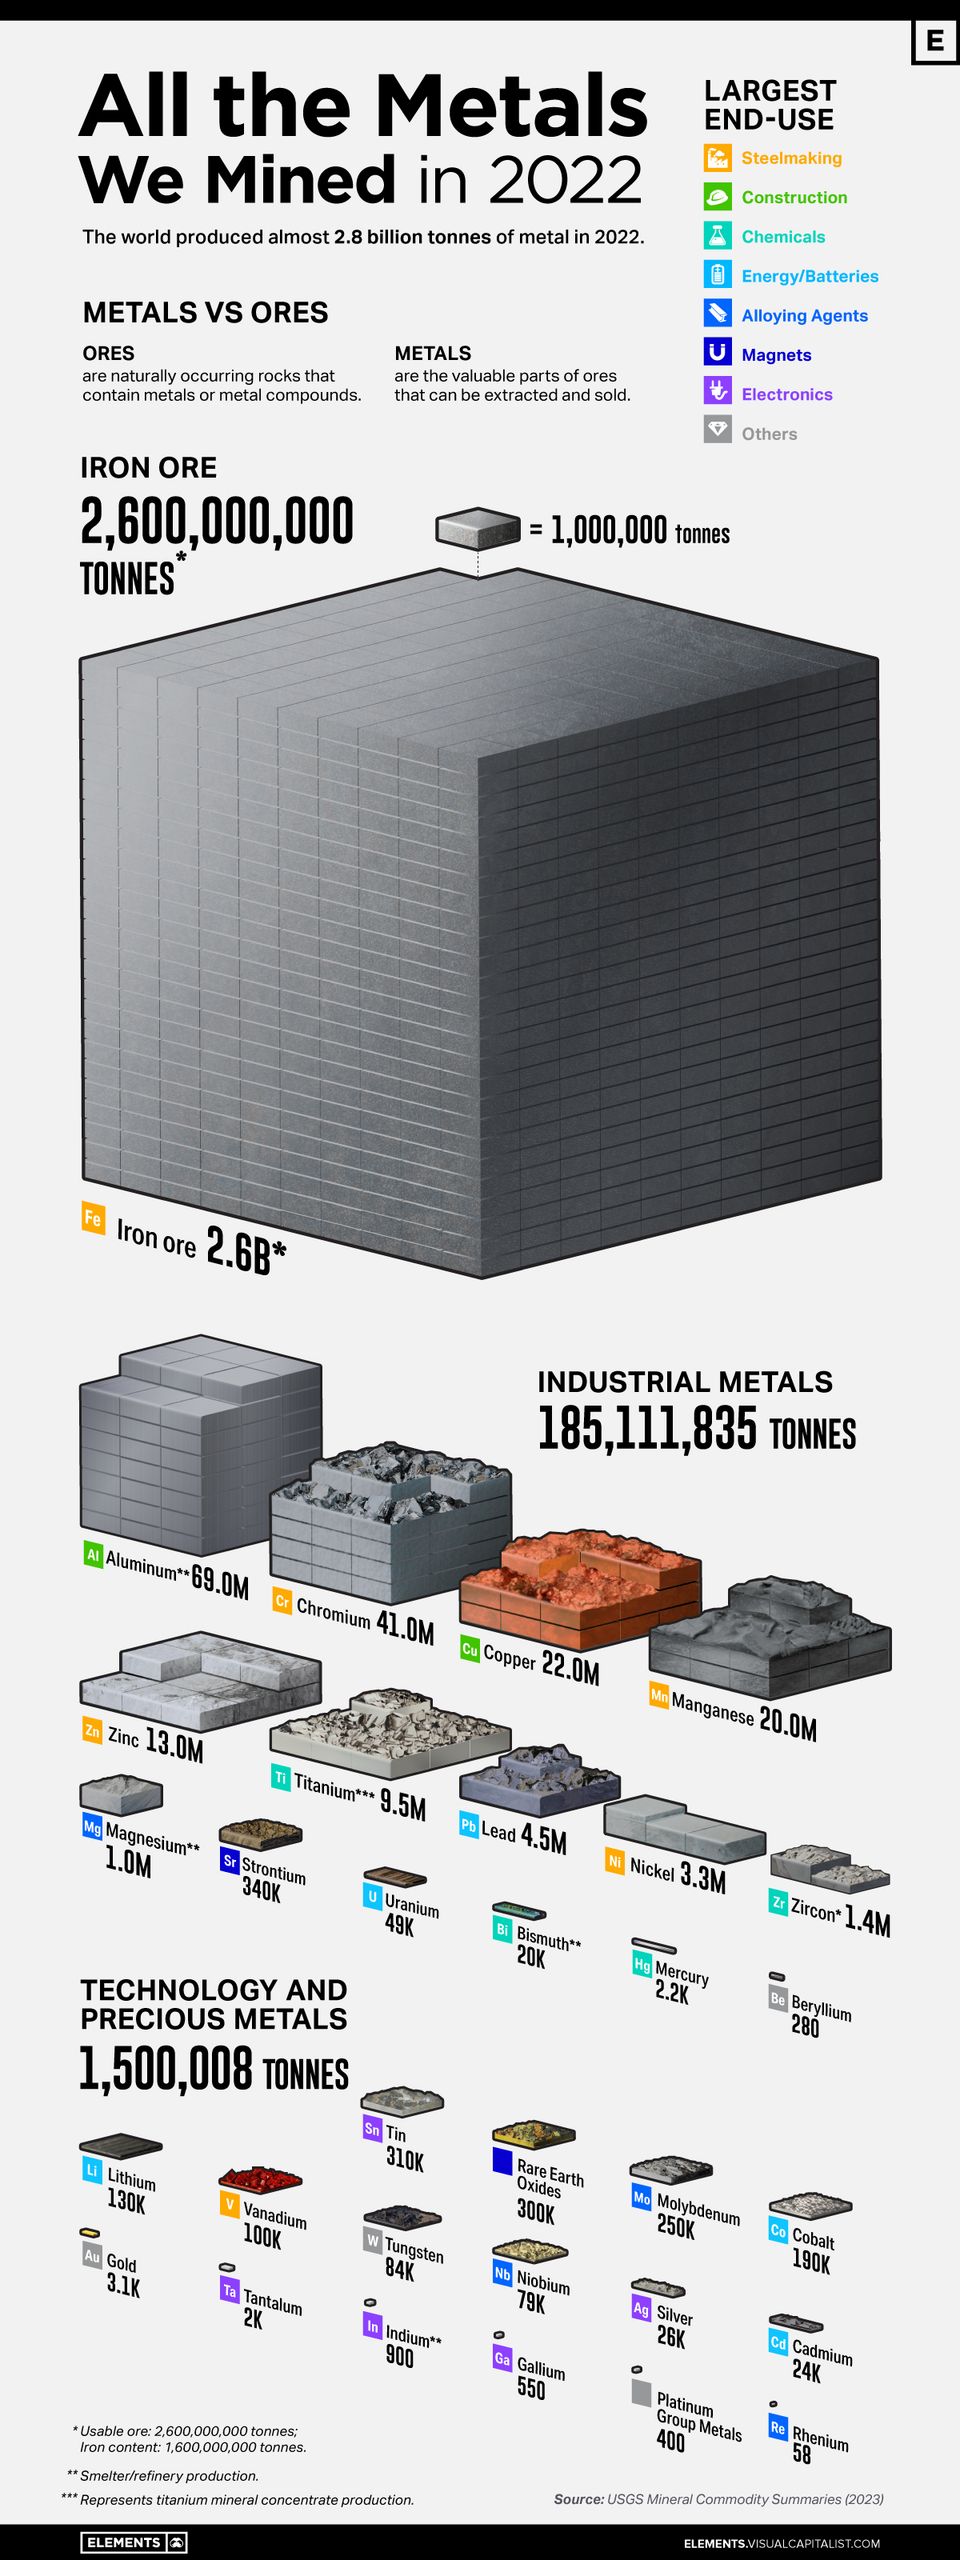 All the Metals We Mined in One Visualization (2022!)